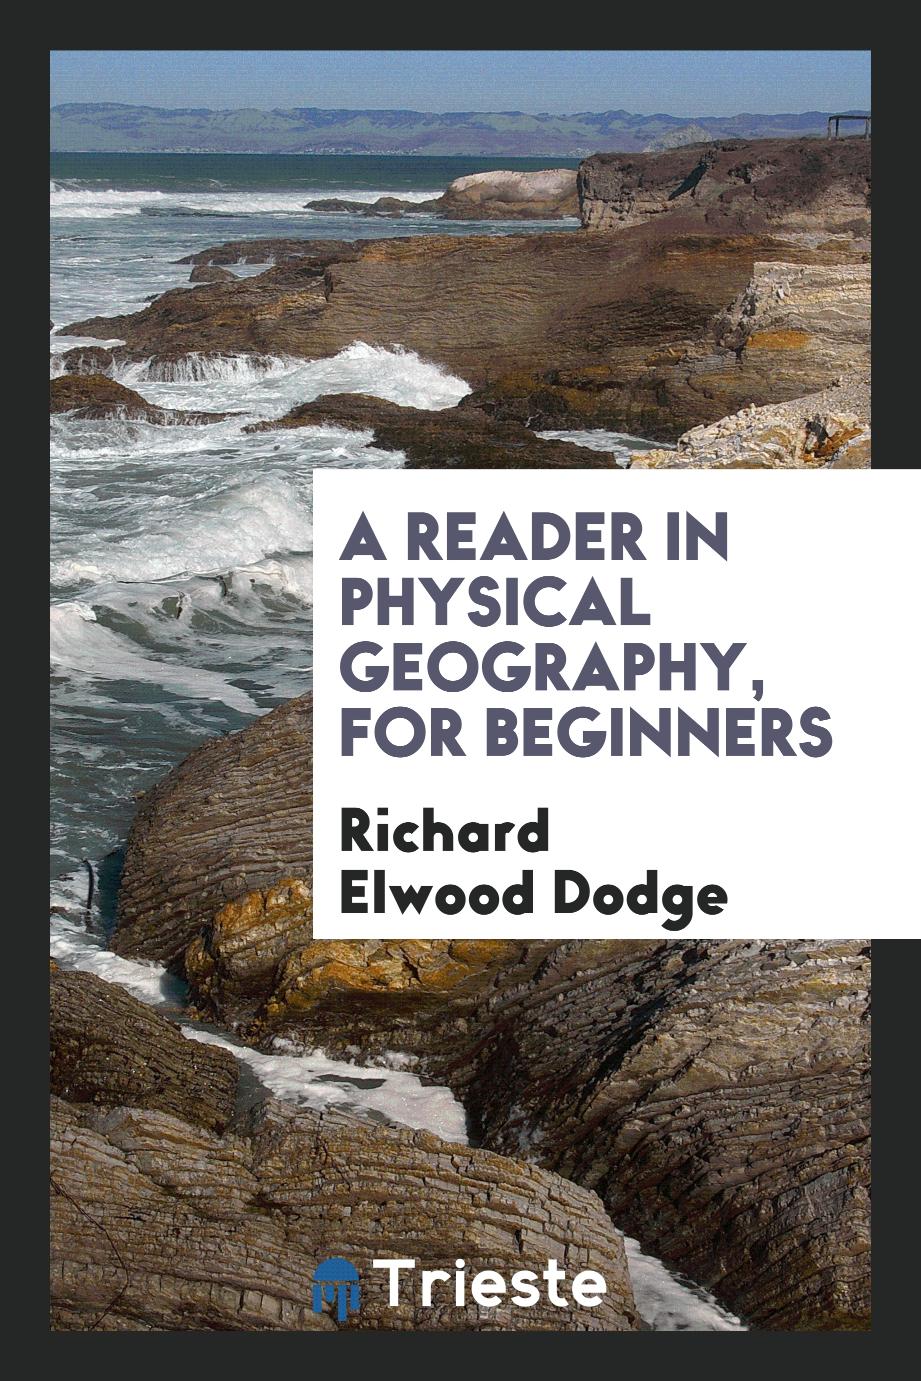 A reader in physical geography, for beginners